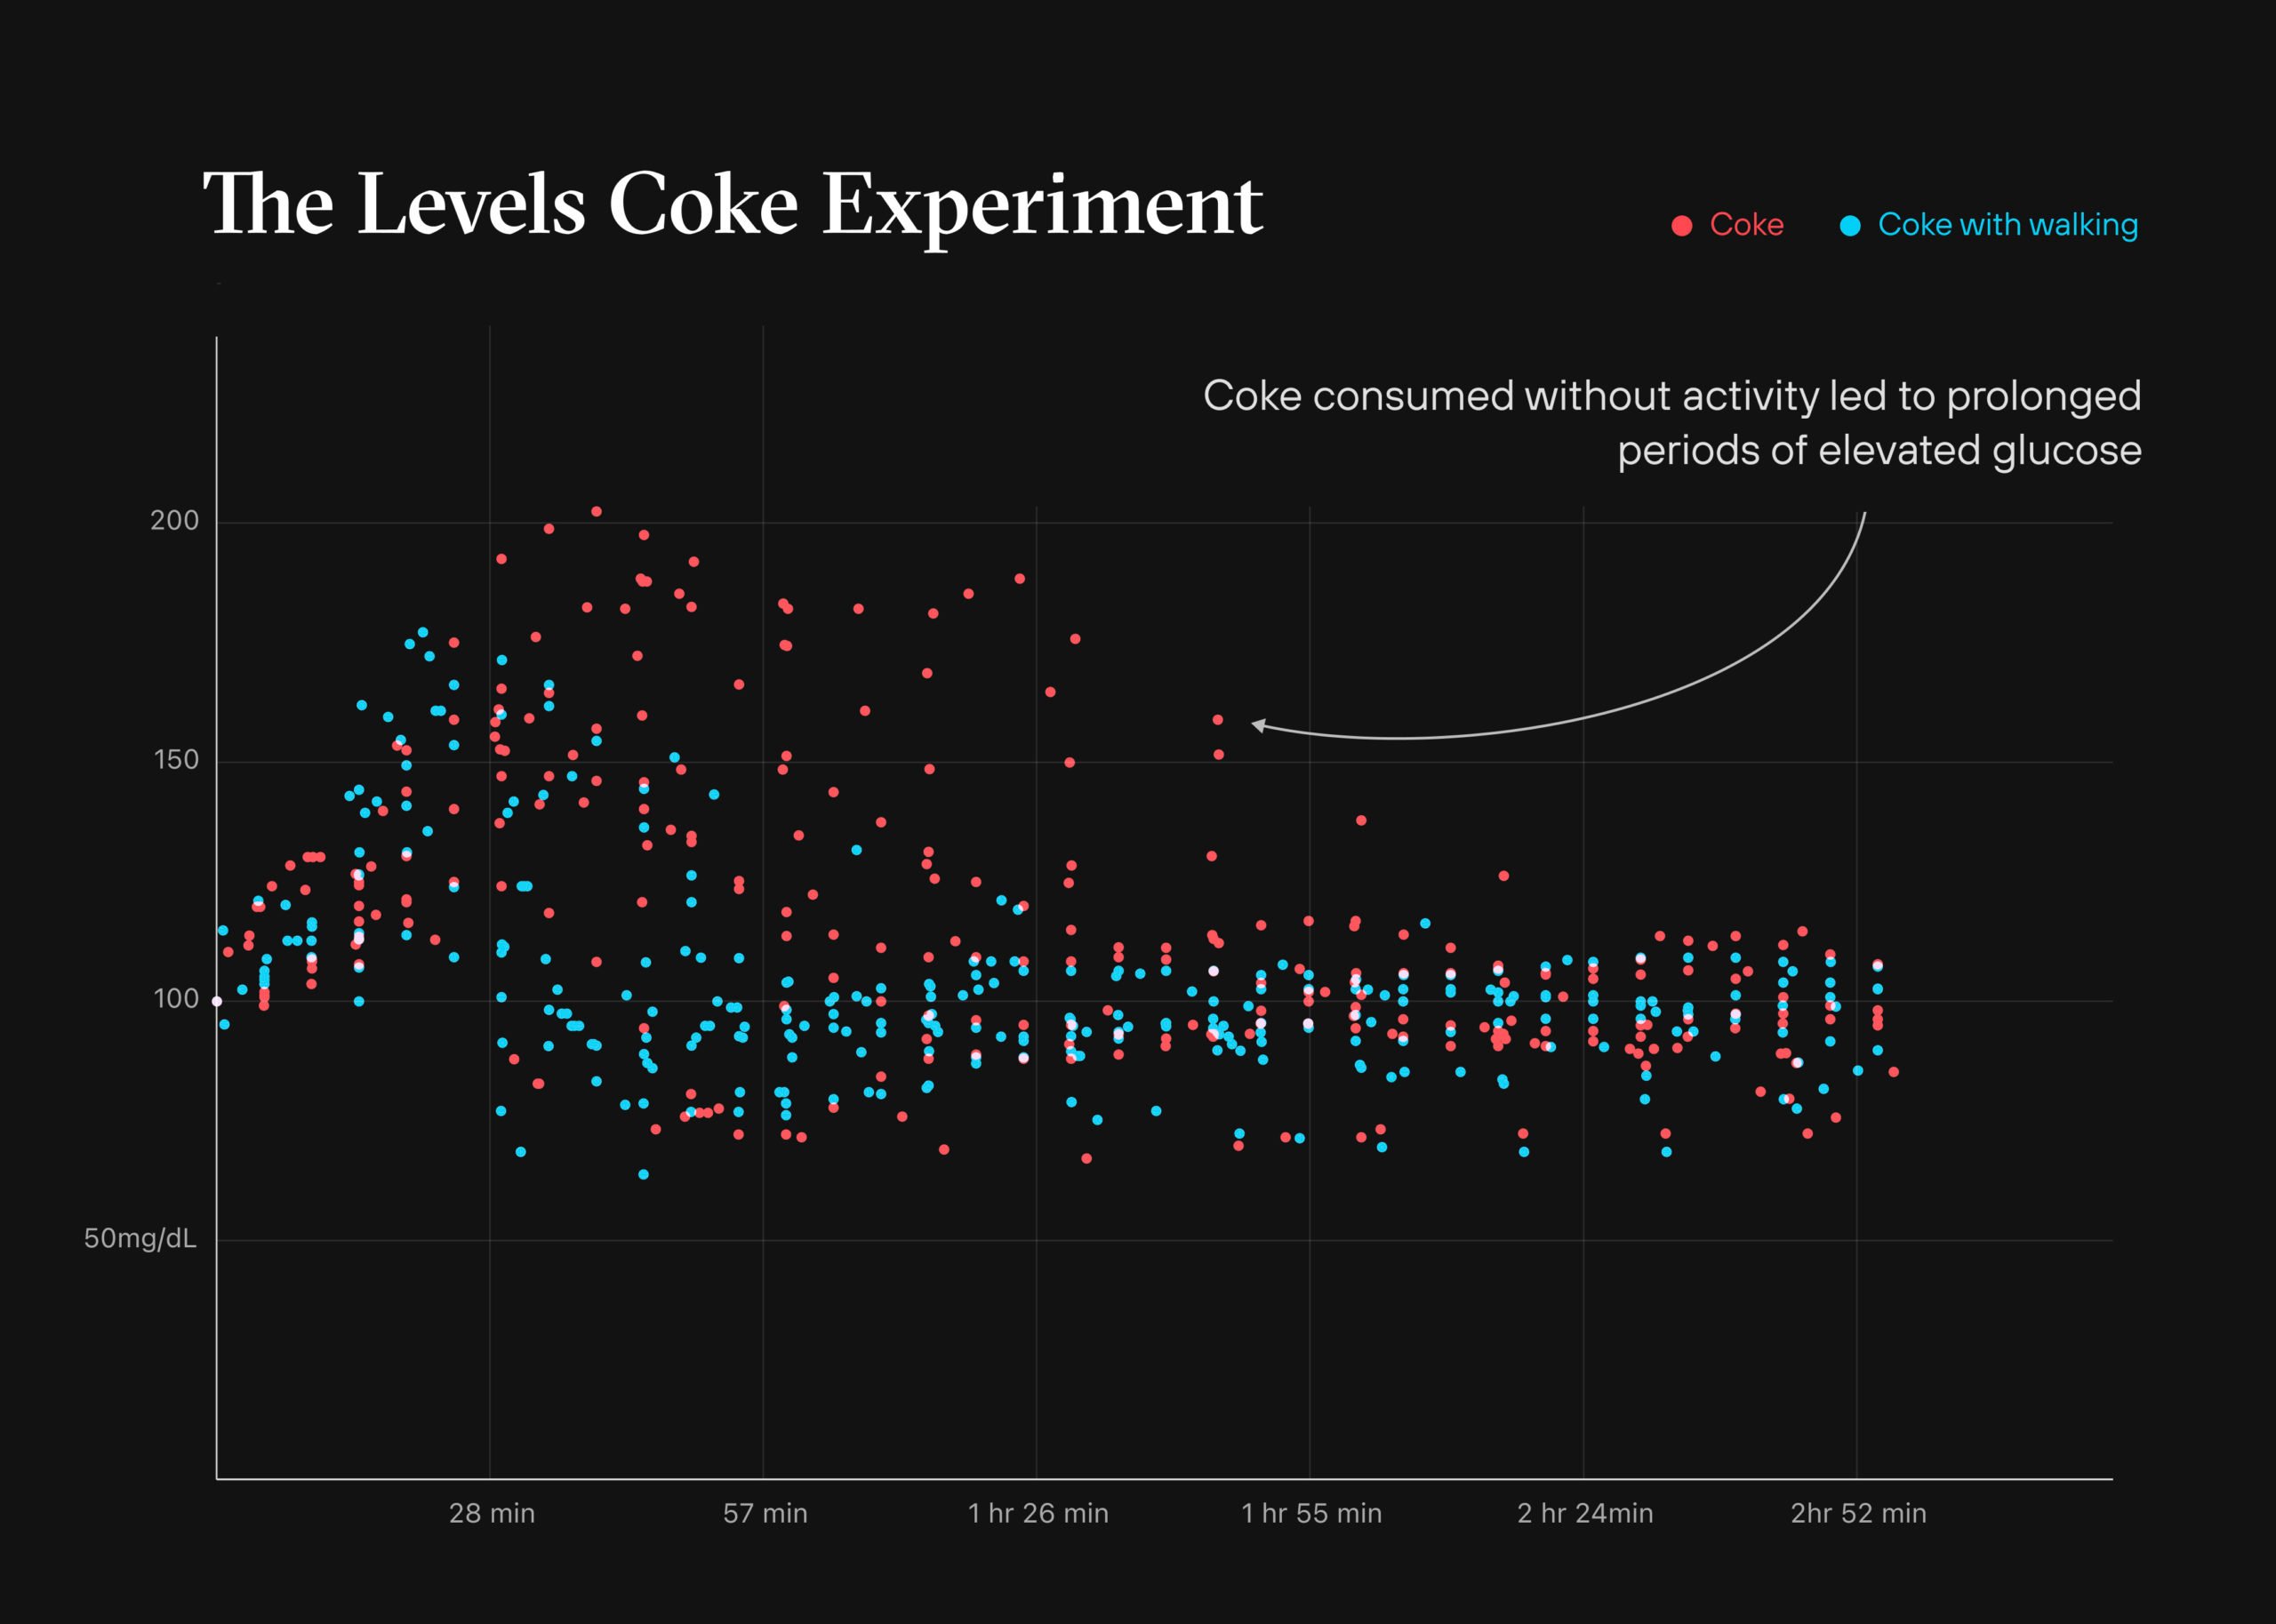 What a can of Coke—with and without a walk after—does to your blood sugar